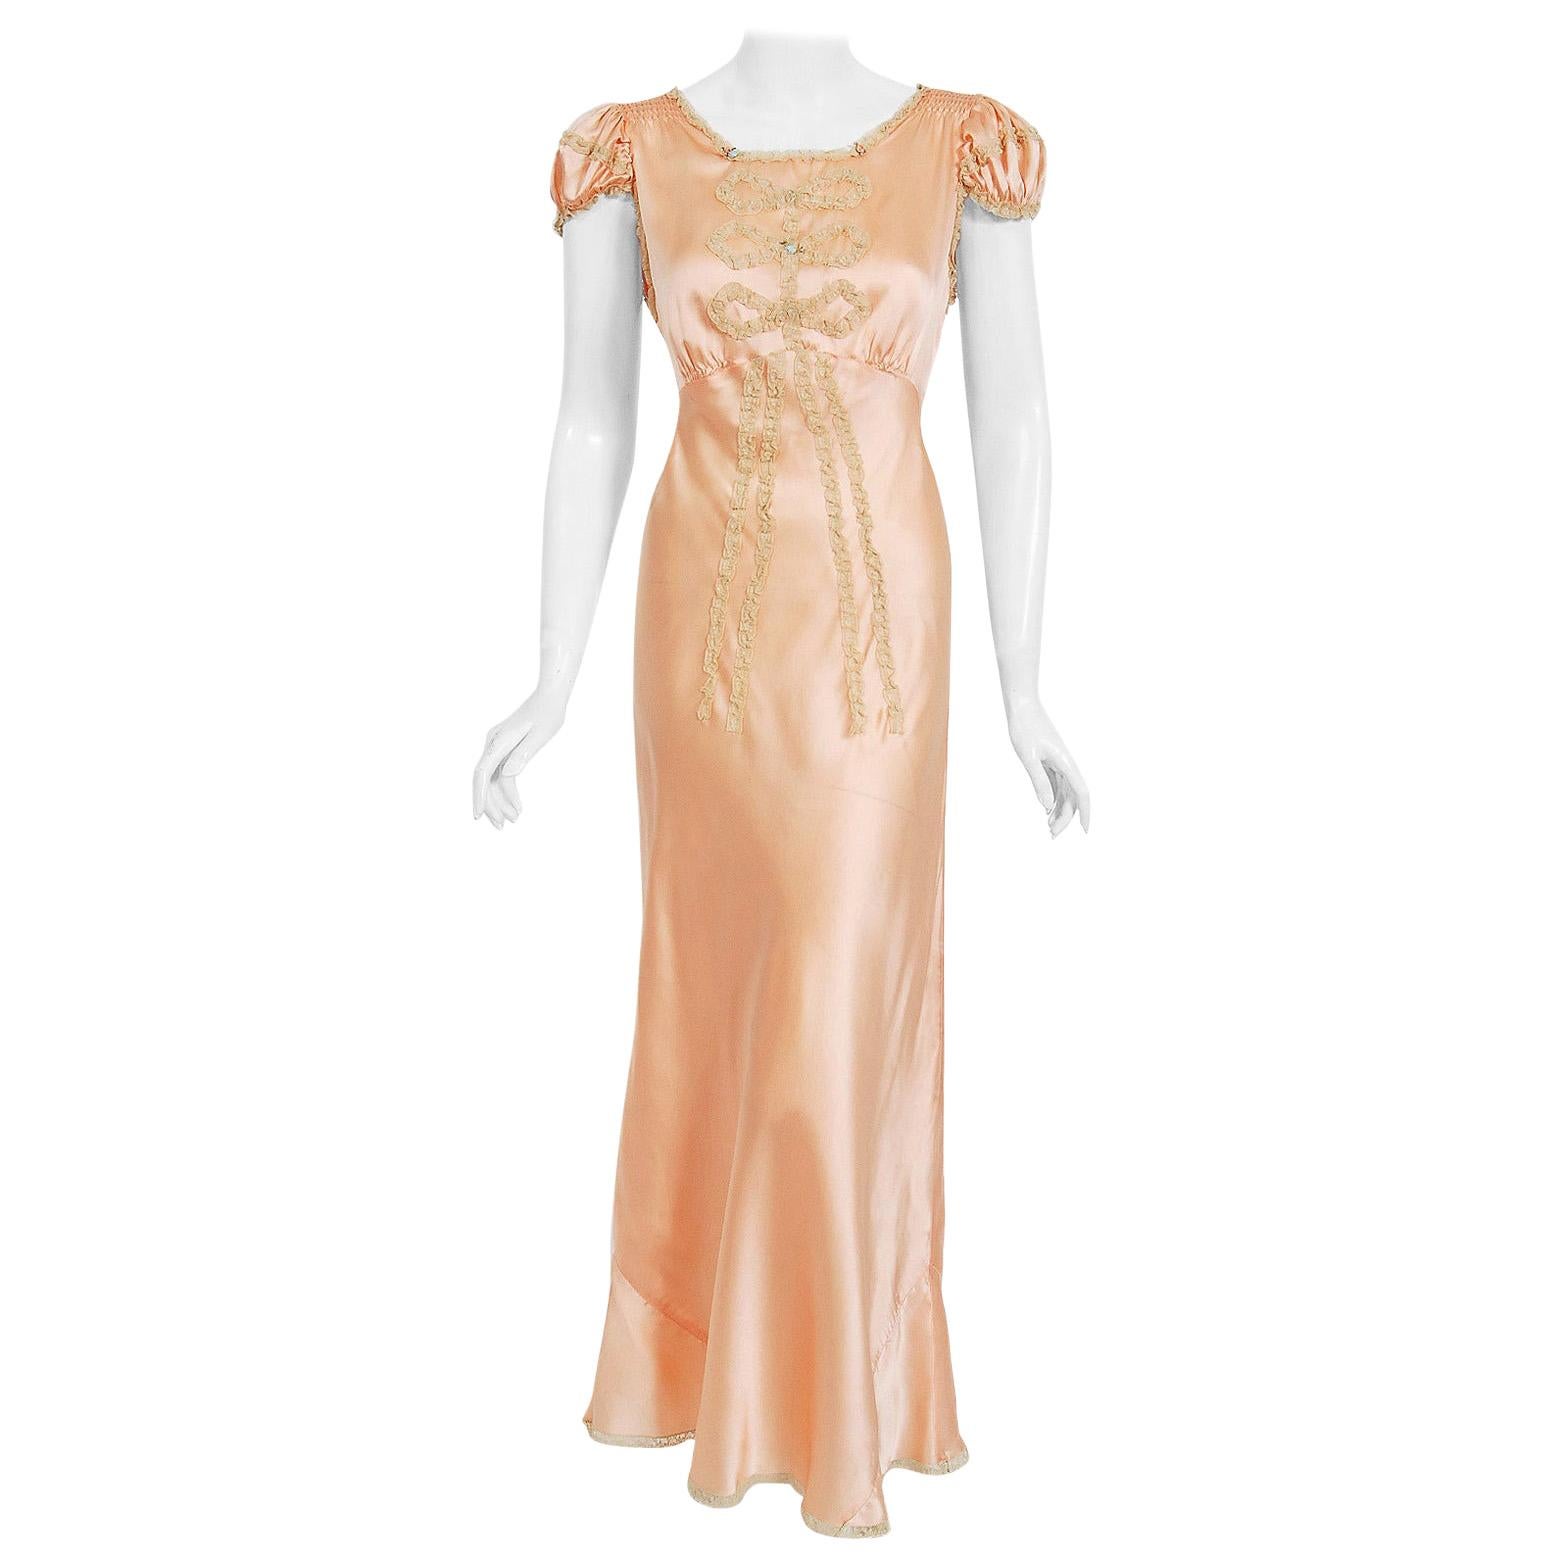 Vintage 1930's Champagne-Pink Silk Lace Puff Sleeve Bias-Cut Slip Night Gown